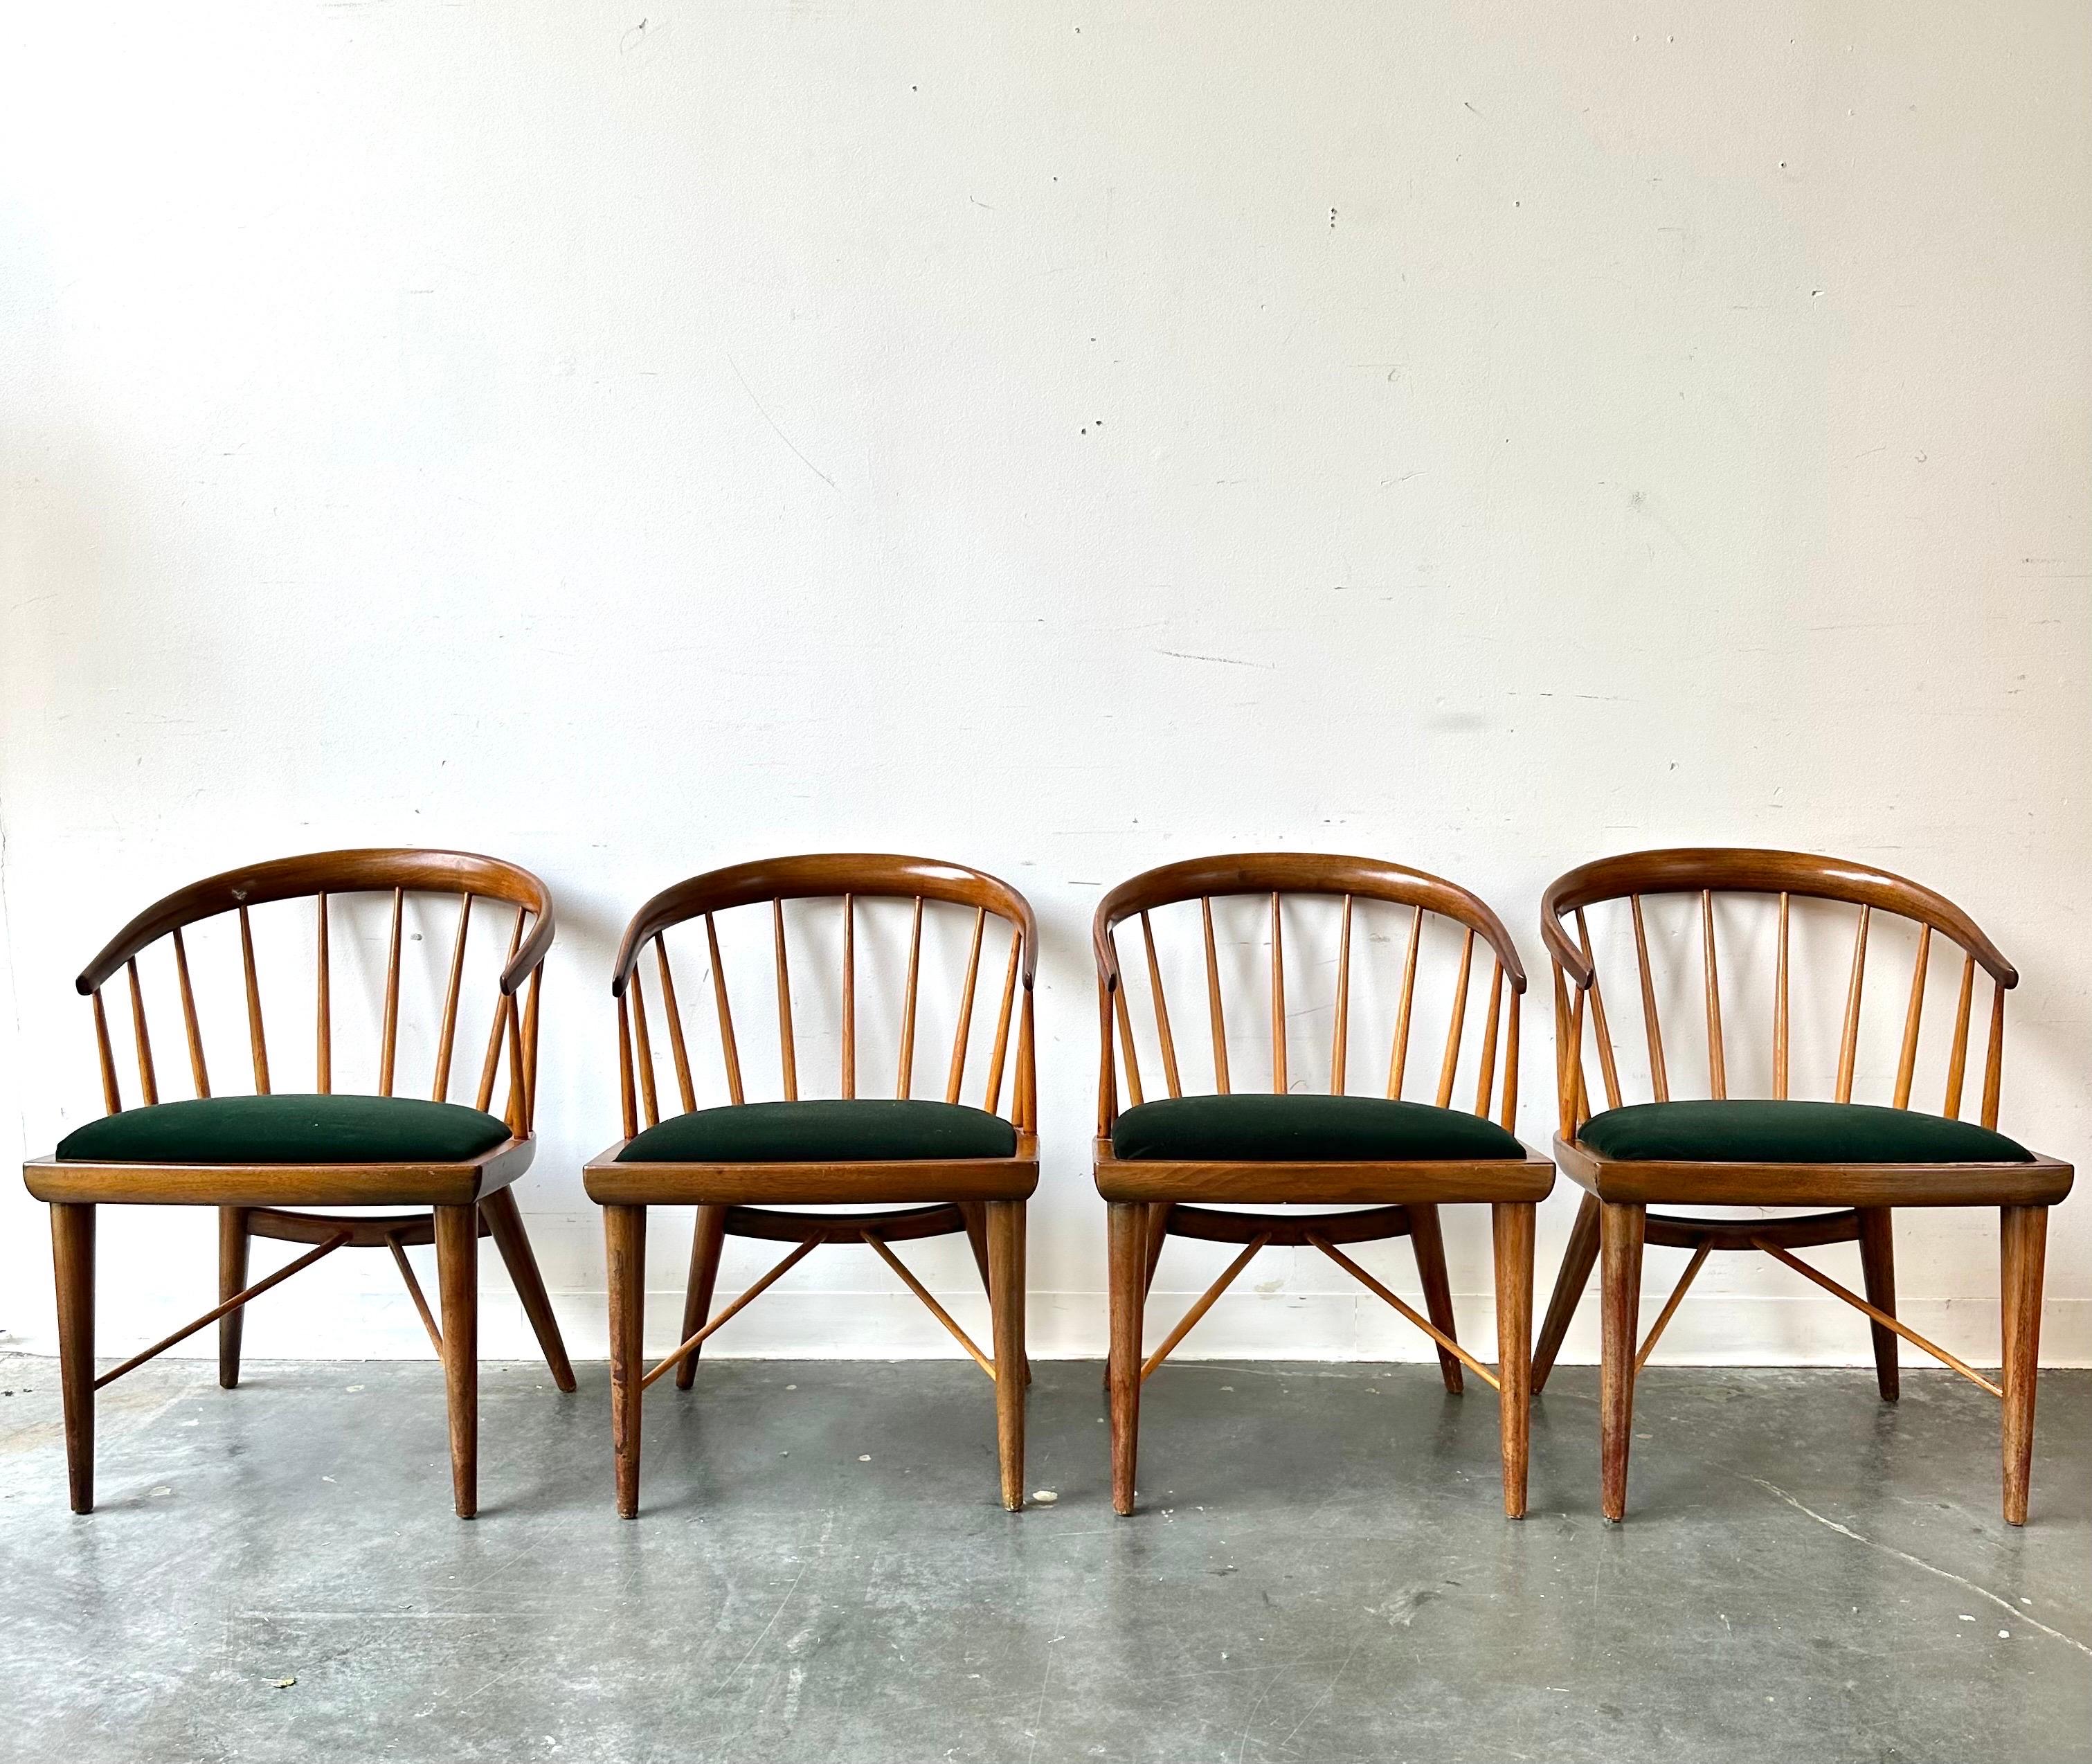 Barrel back dining chairs

In the manner of Paul Mccobb set of six chair dining with new green velvet upholstery.

Gorgeous look with some vintage wear.